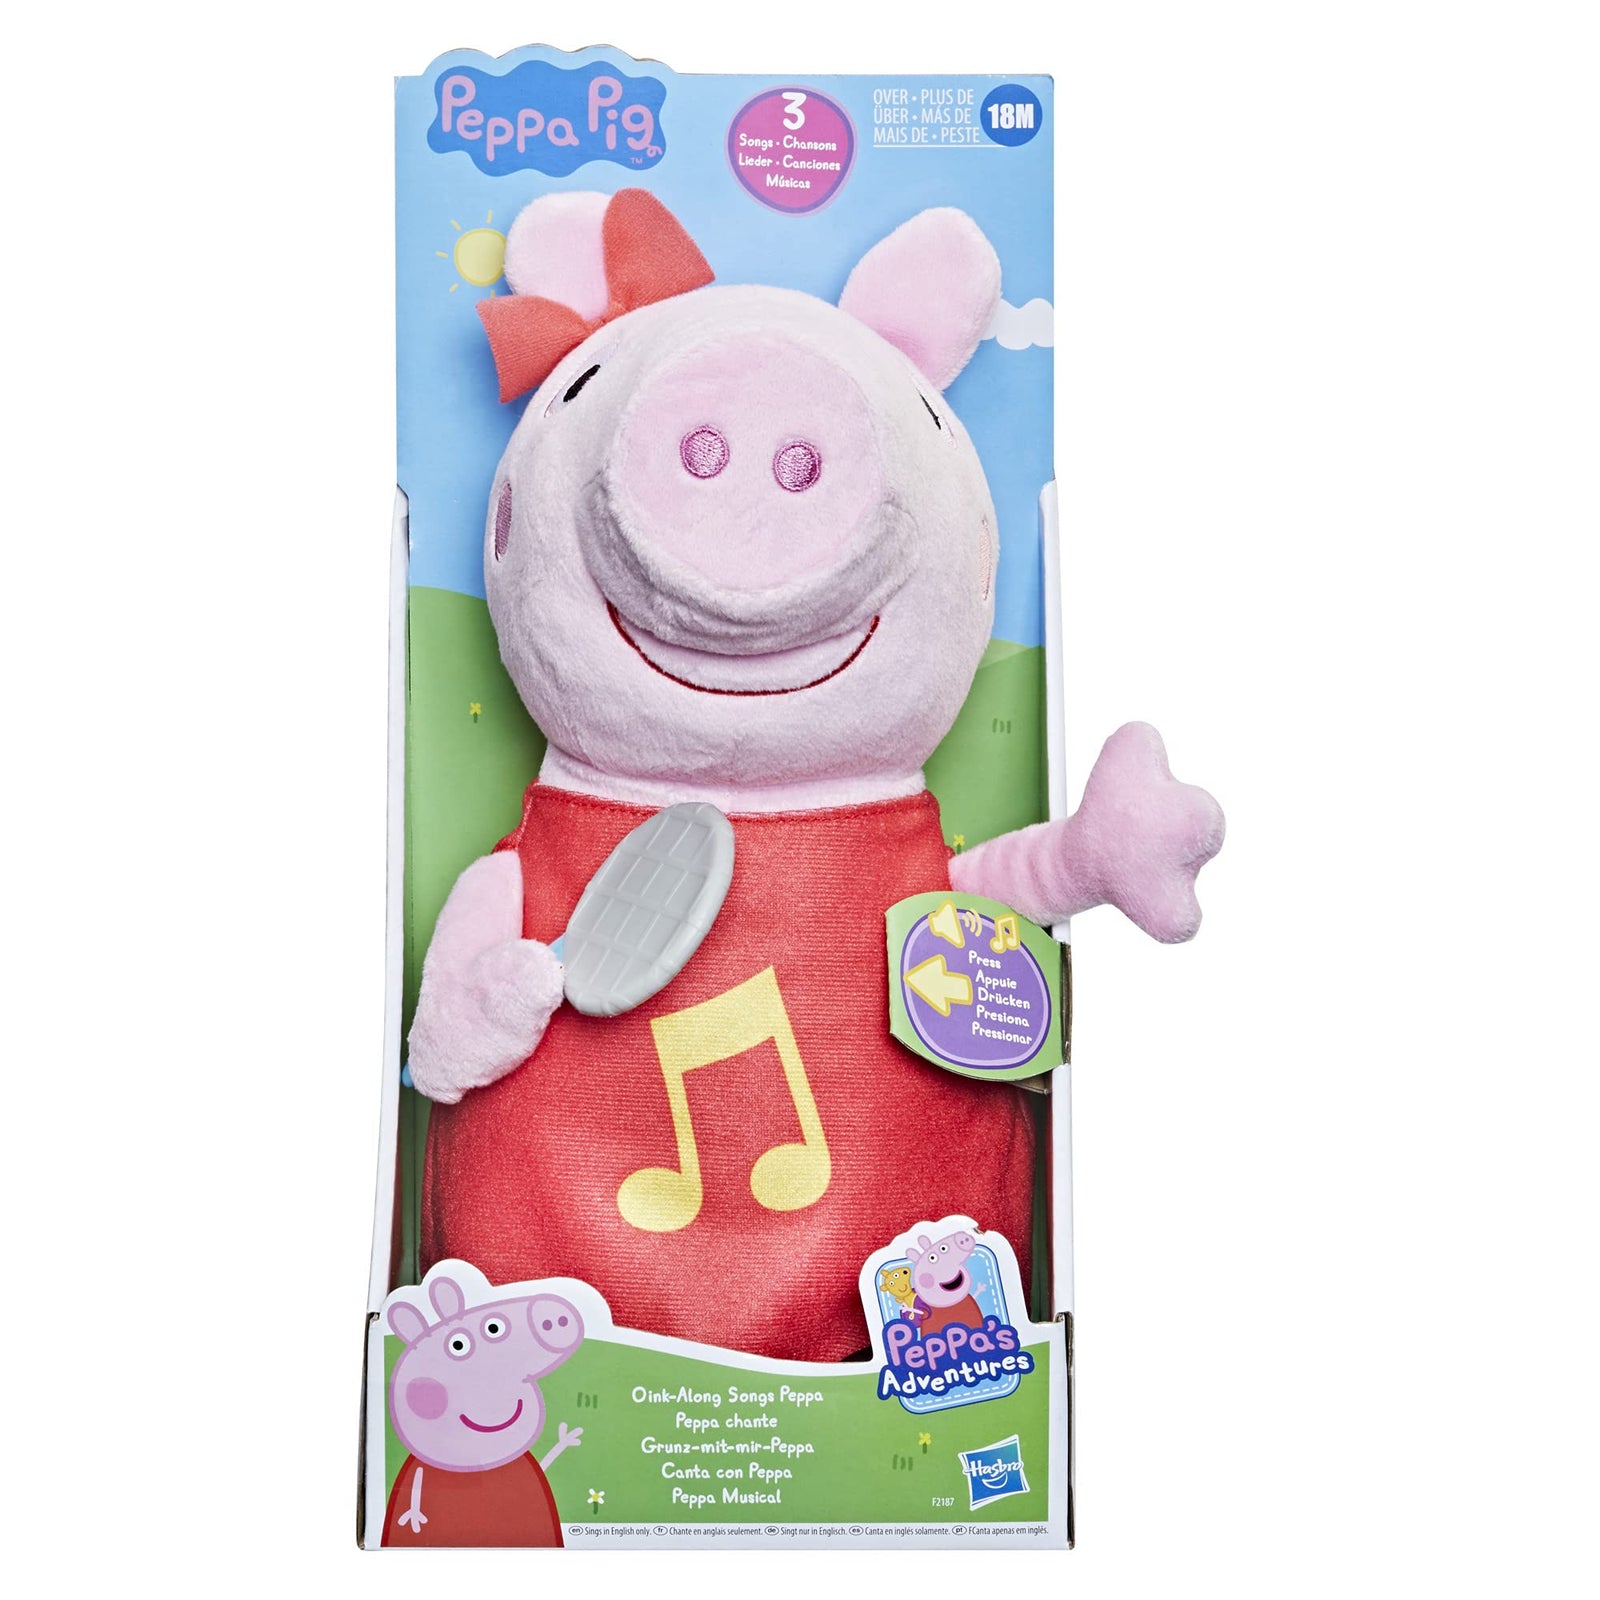 Hasbro Peppa Pig Oink-Along Songs Peppa Singing Plush Doll with Sparkly Red Dress and Bow, Sings 3 Songs Inspired by The TV Series, Ages 3 and up